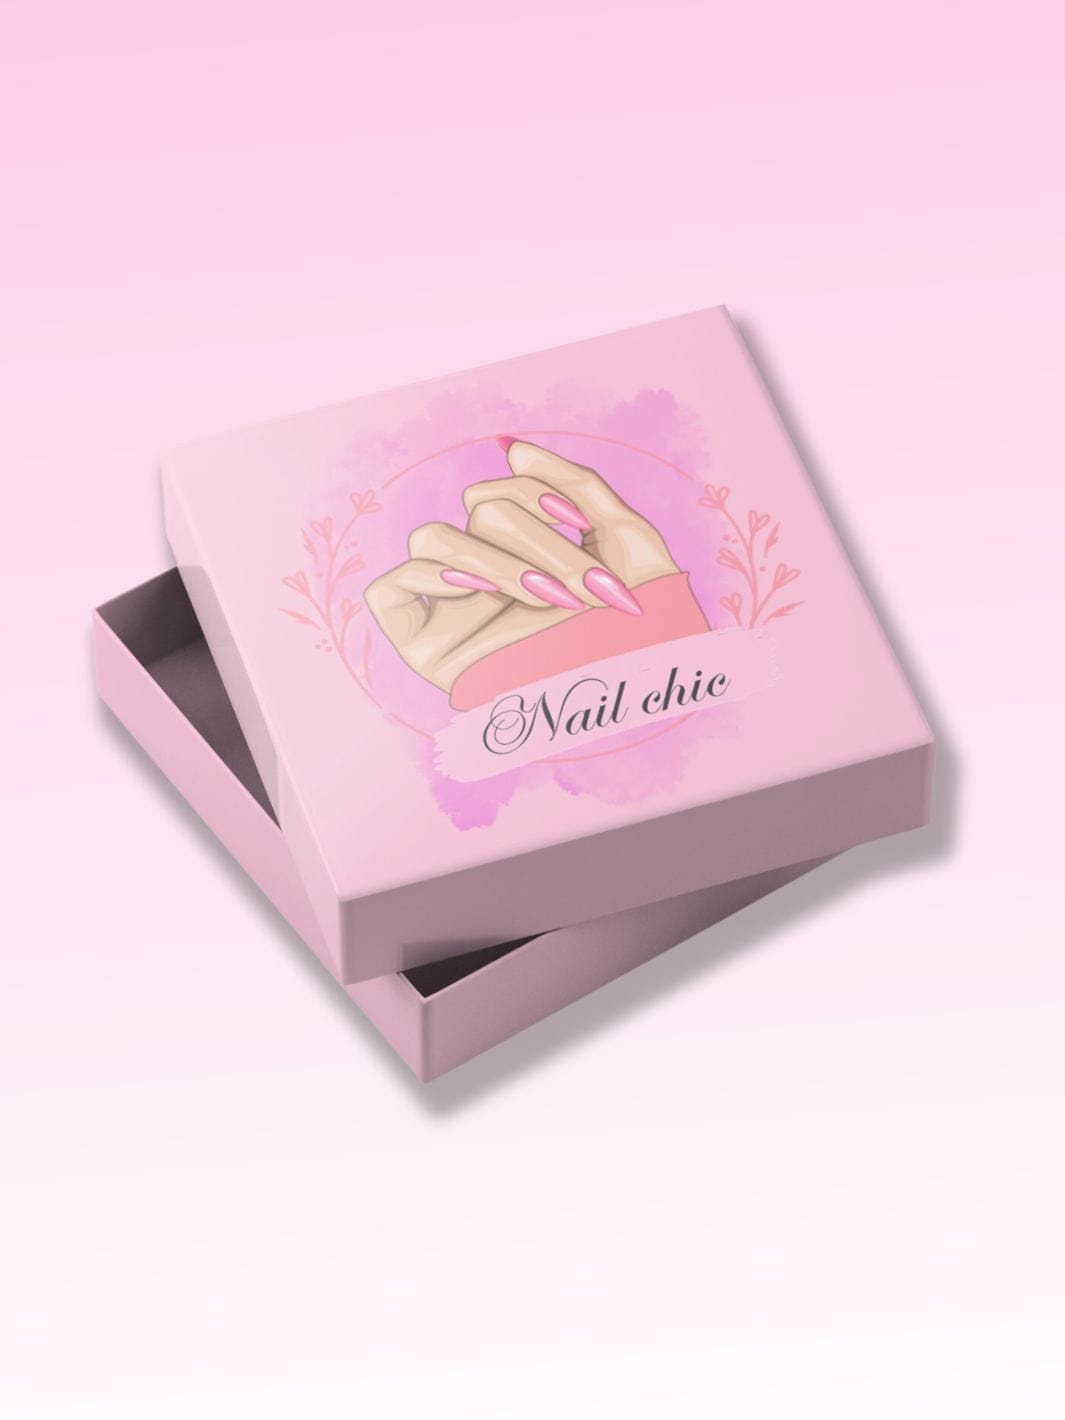 Faux ongles forme amande Nail Chic